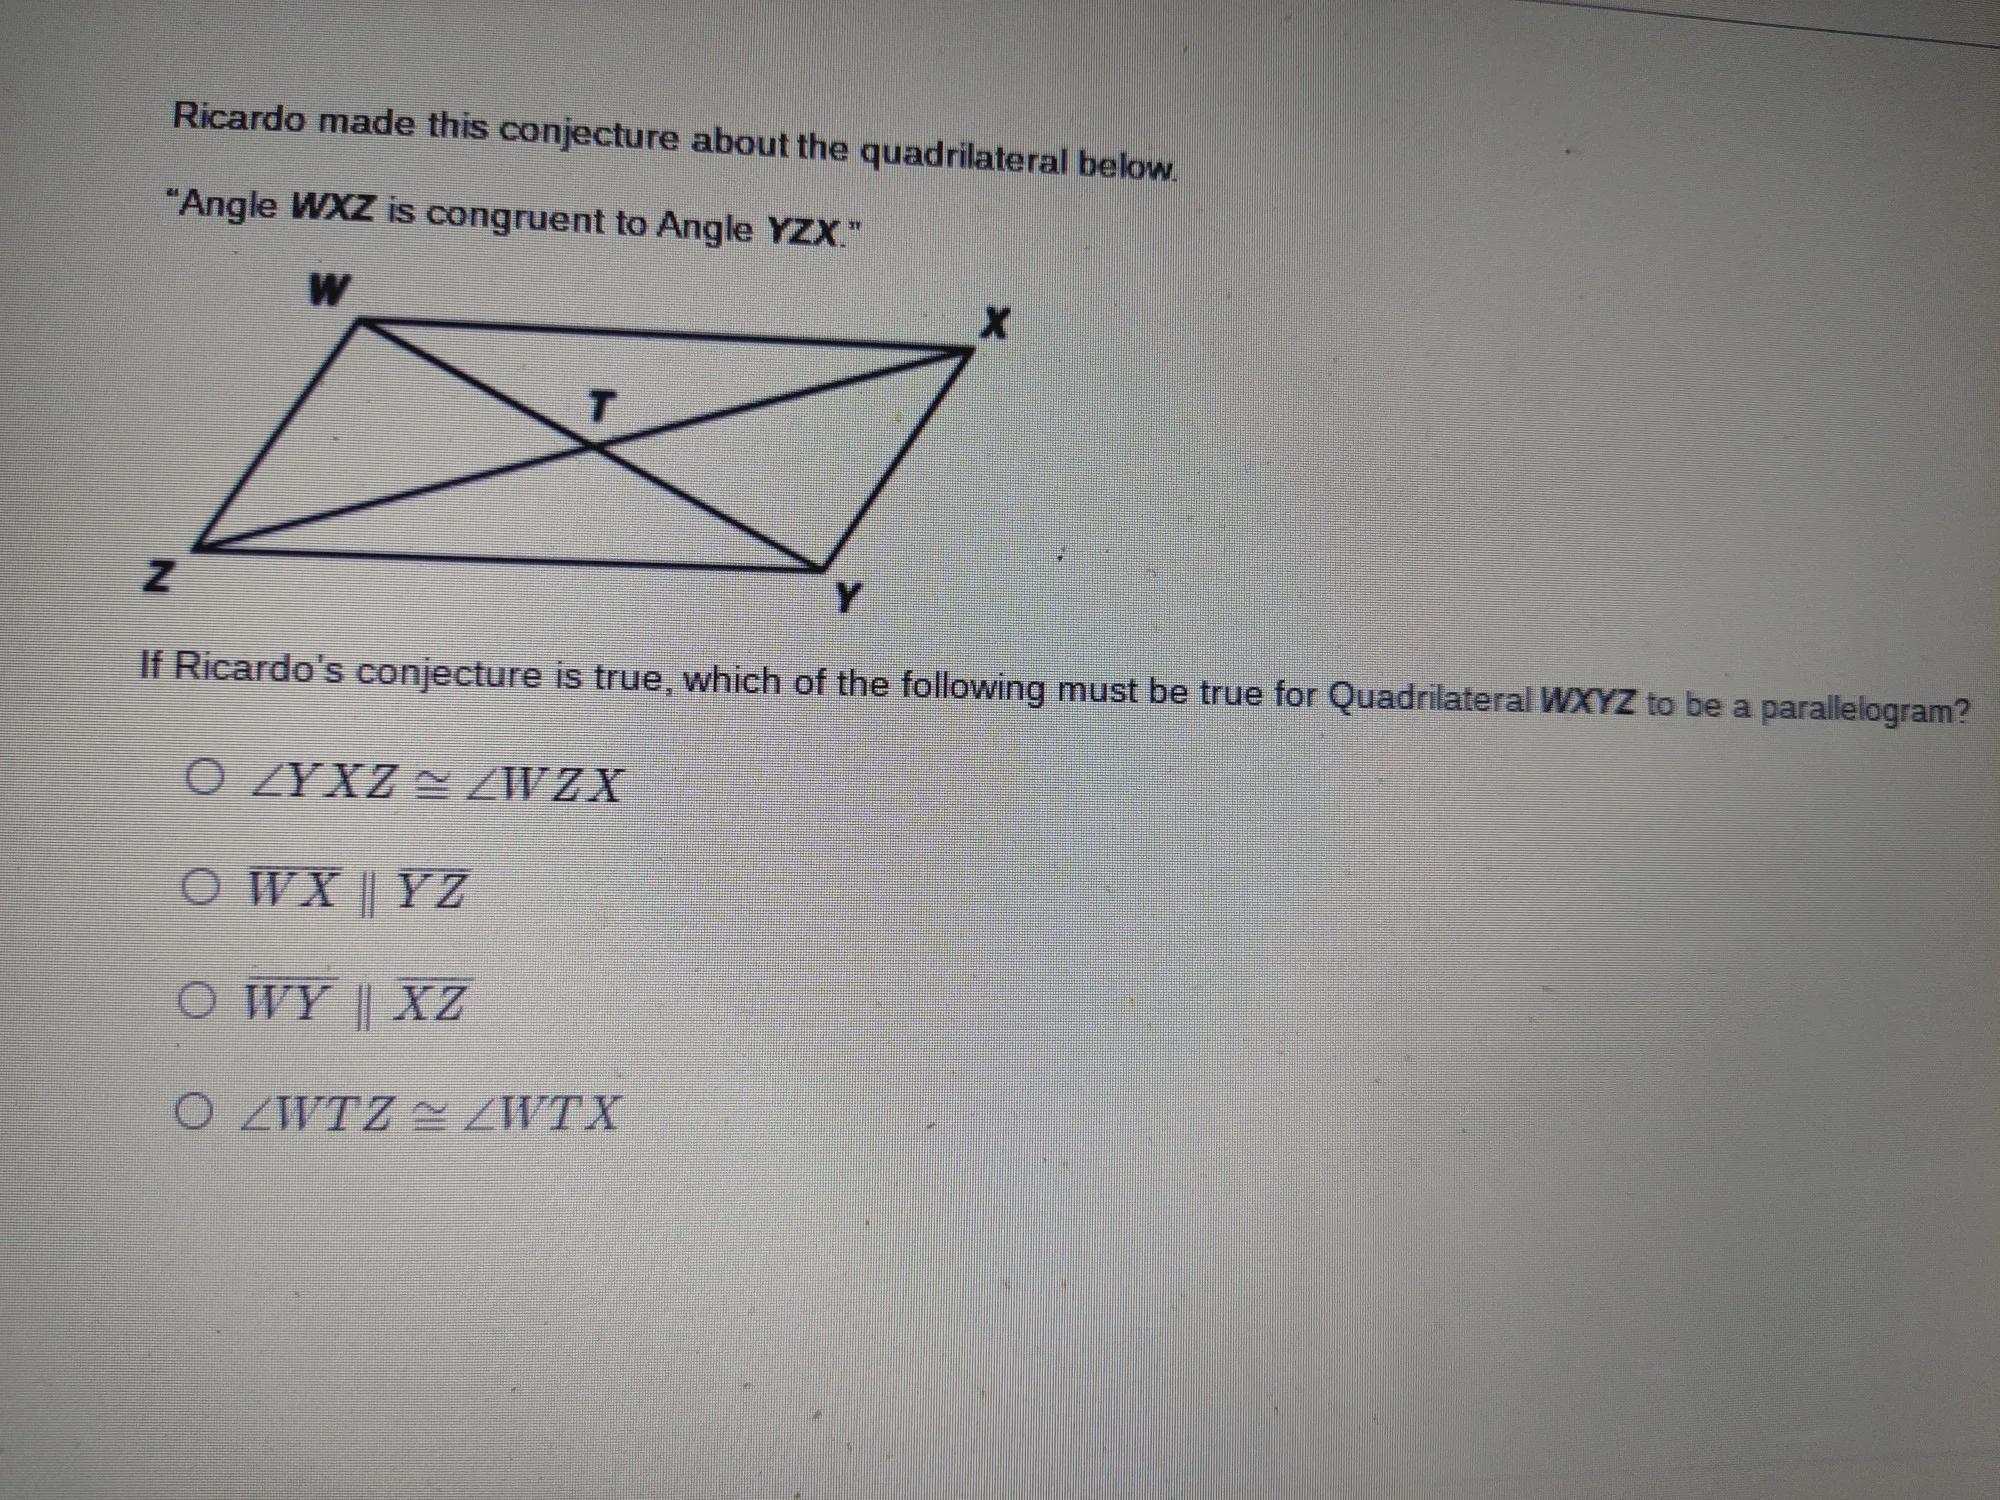 In The Quadrilateral Below. Angle WXZ Is Congruent To Angle YZX." If Ricardo's Conjecture Is True, Which